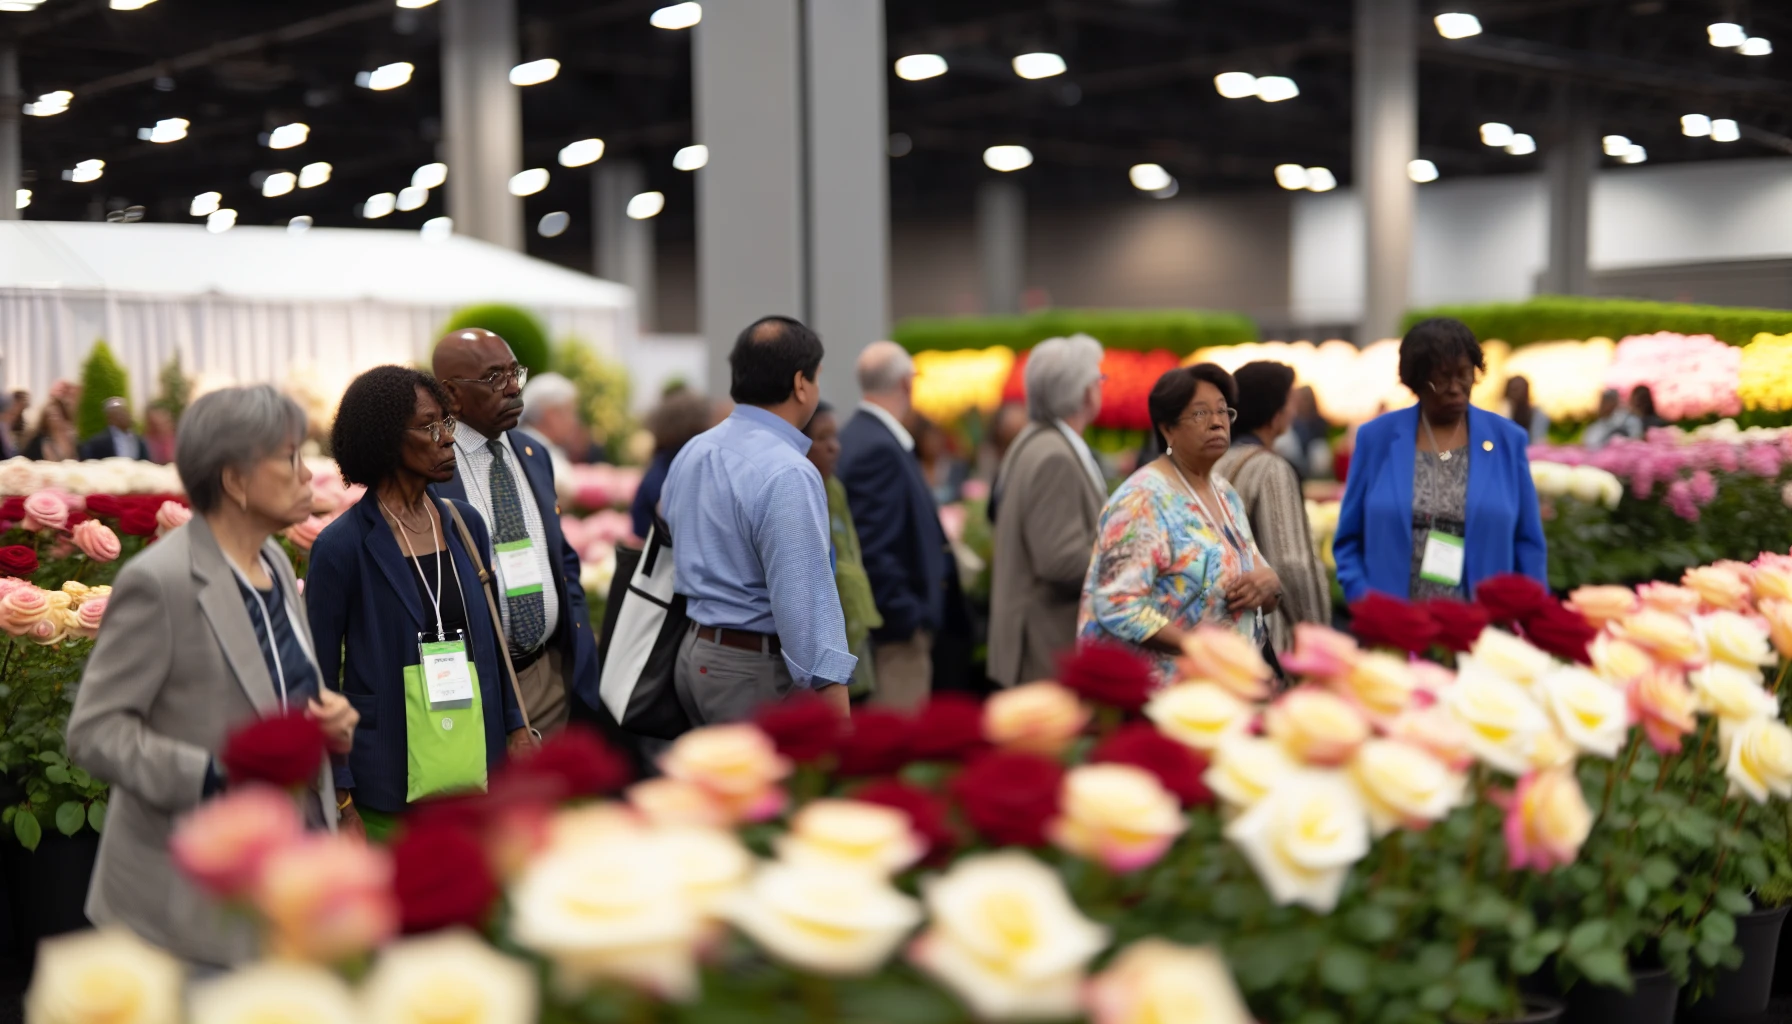 Annual rose show event in New York, celebrating the beauty and history of roses